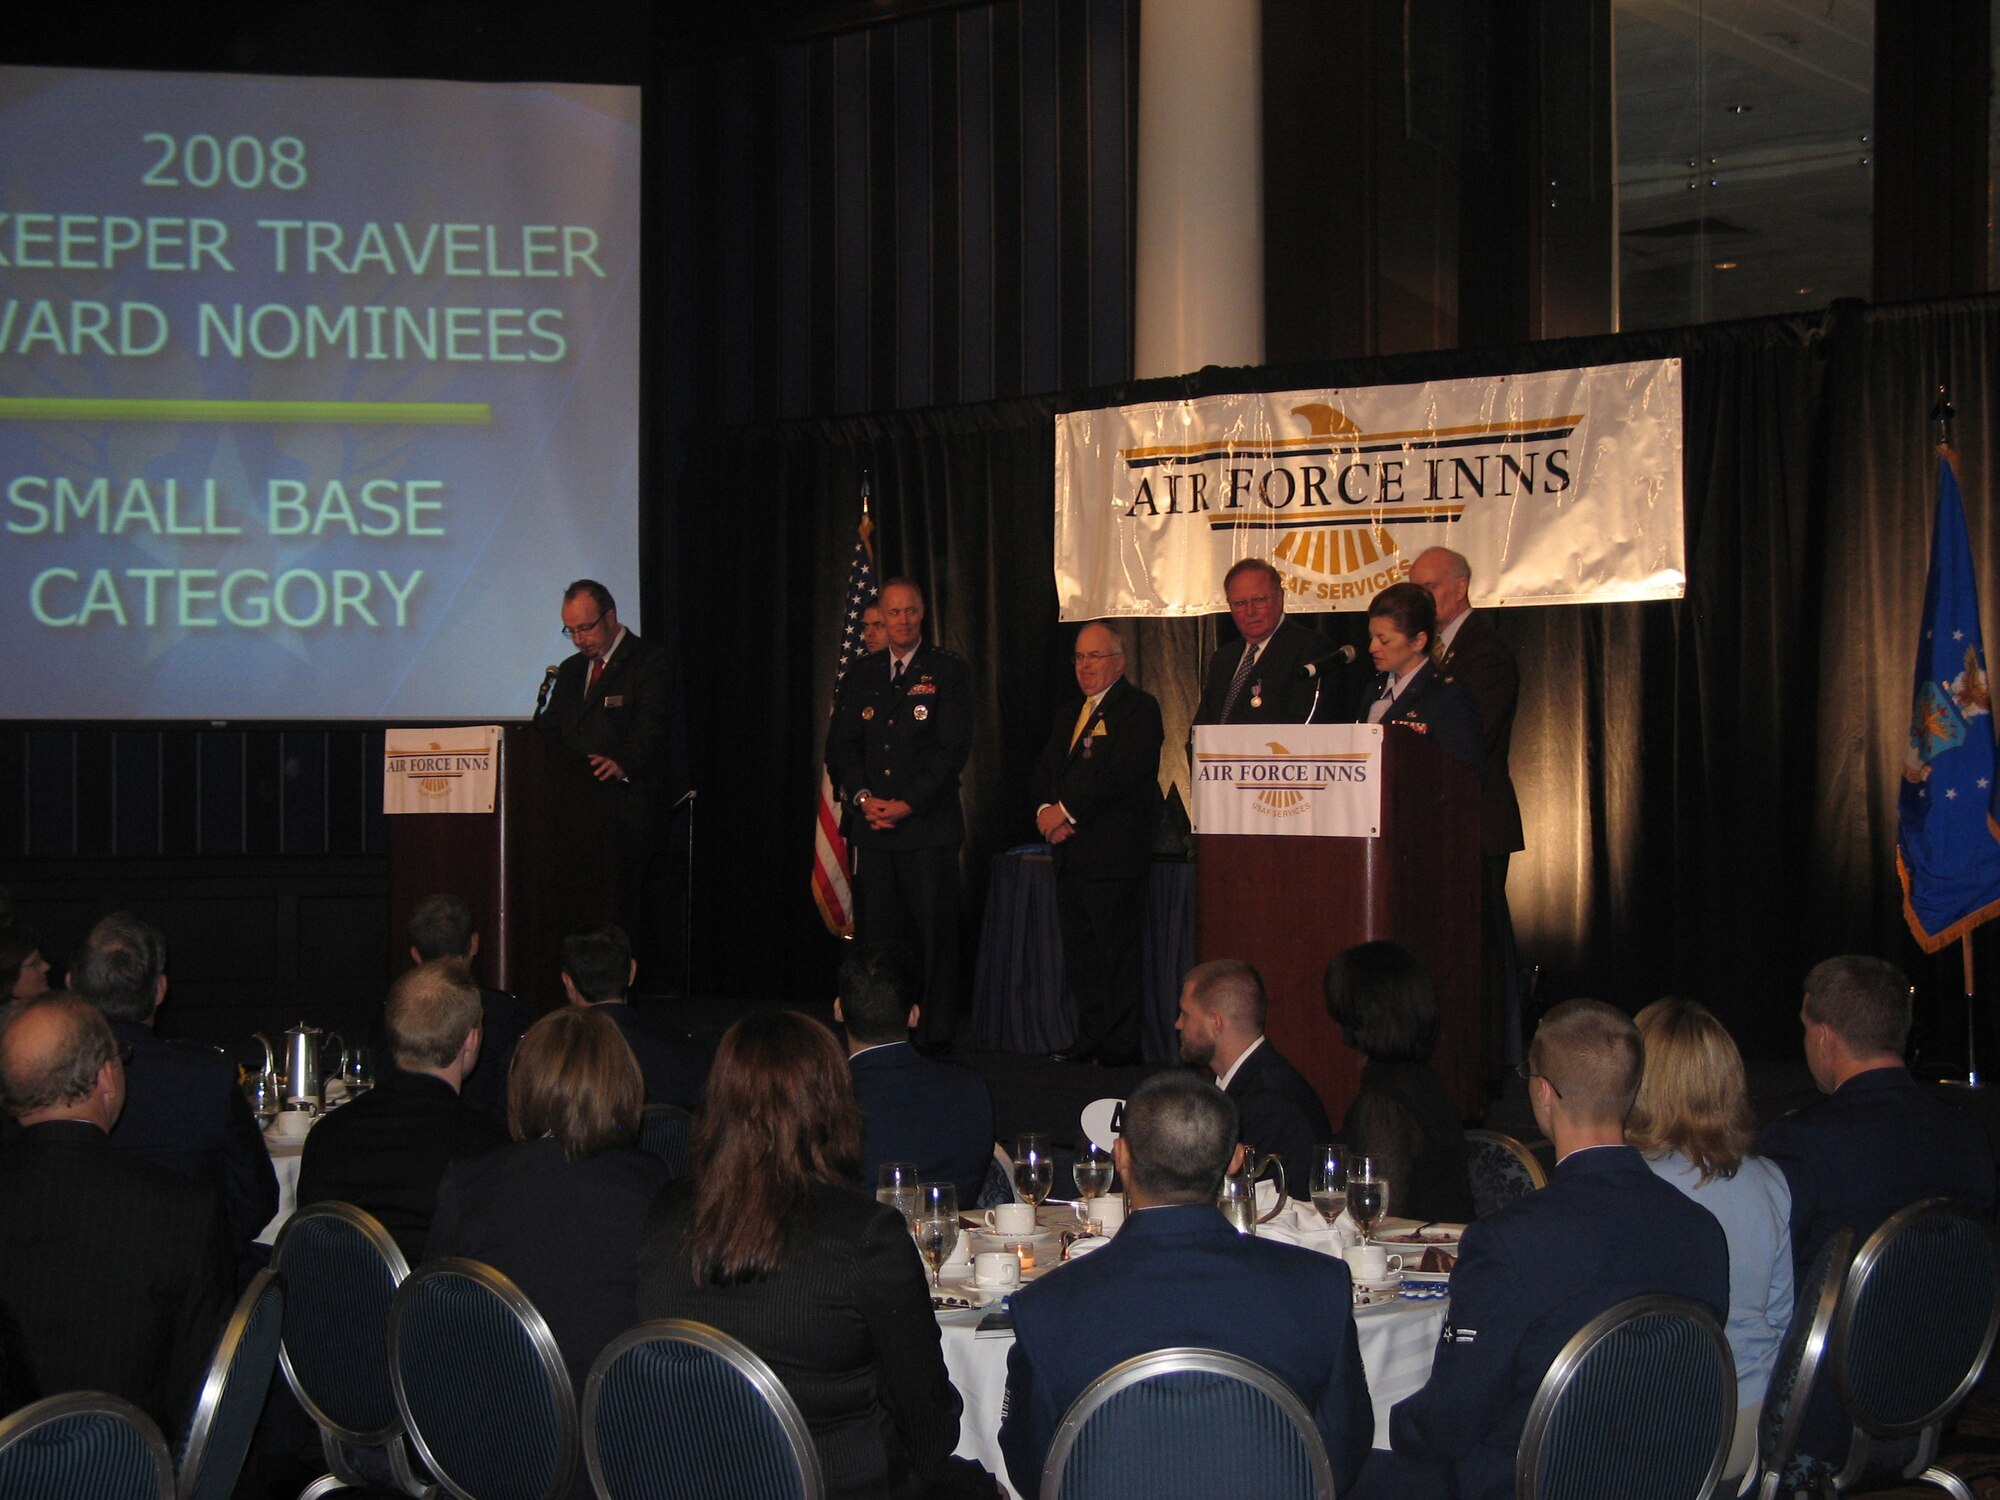 The annual Air Force Innkeeper Awards, November 2008, at the International Hotel/Motel Restaurant Show, New York City, NY. Featured presenters from left to right, Lt. Gen. Richard Newton, Deputy Chief of Staff for Manpower and Personnel, Headquarters U.S. Air Force, Washington, D.C., Joseph McInerney, president and chief executive officer of the American Hotel & Lodging Association, Joseph Spinnato, president and CEO of the Hotel Association of New York City, Inc., and Art Myers, Air Force Services director. (Photo courtesy of Military Club & Hospitality)